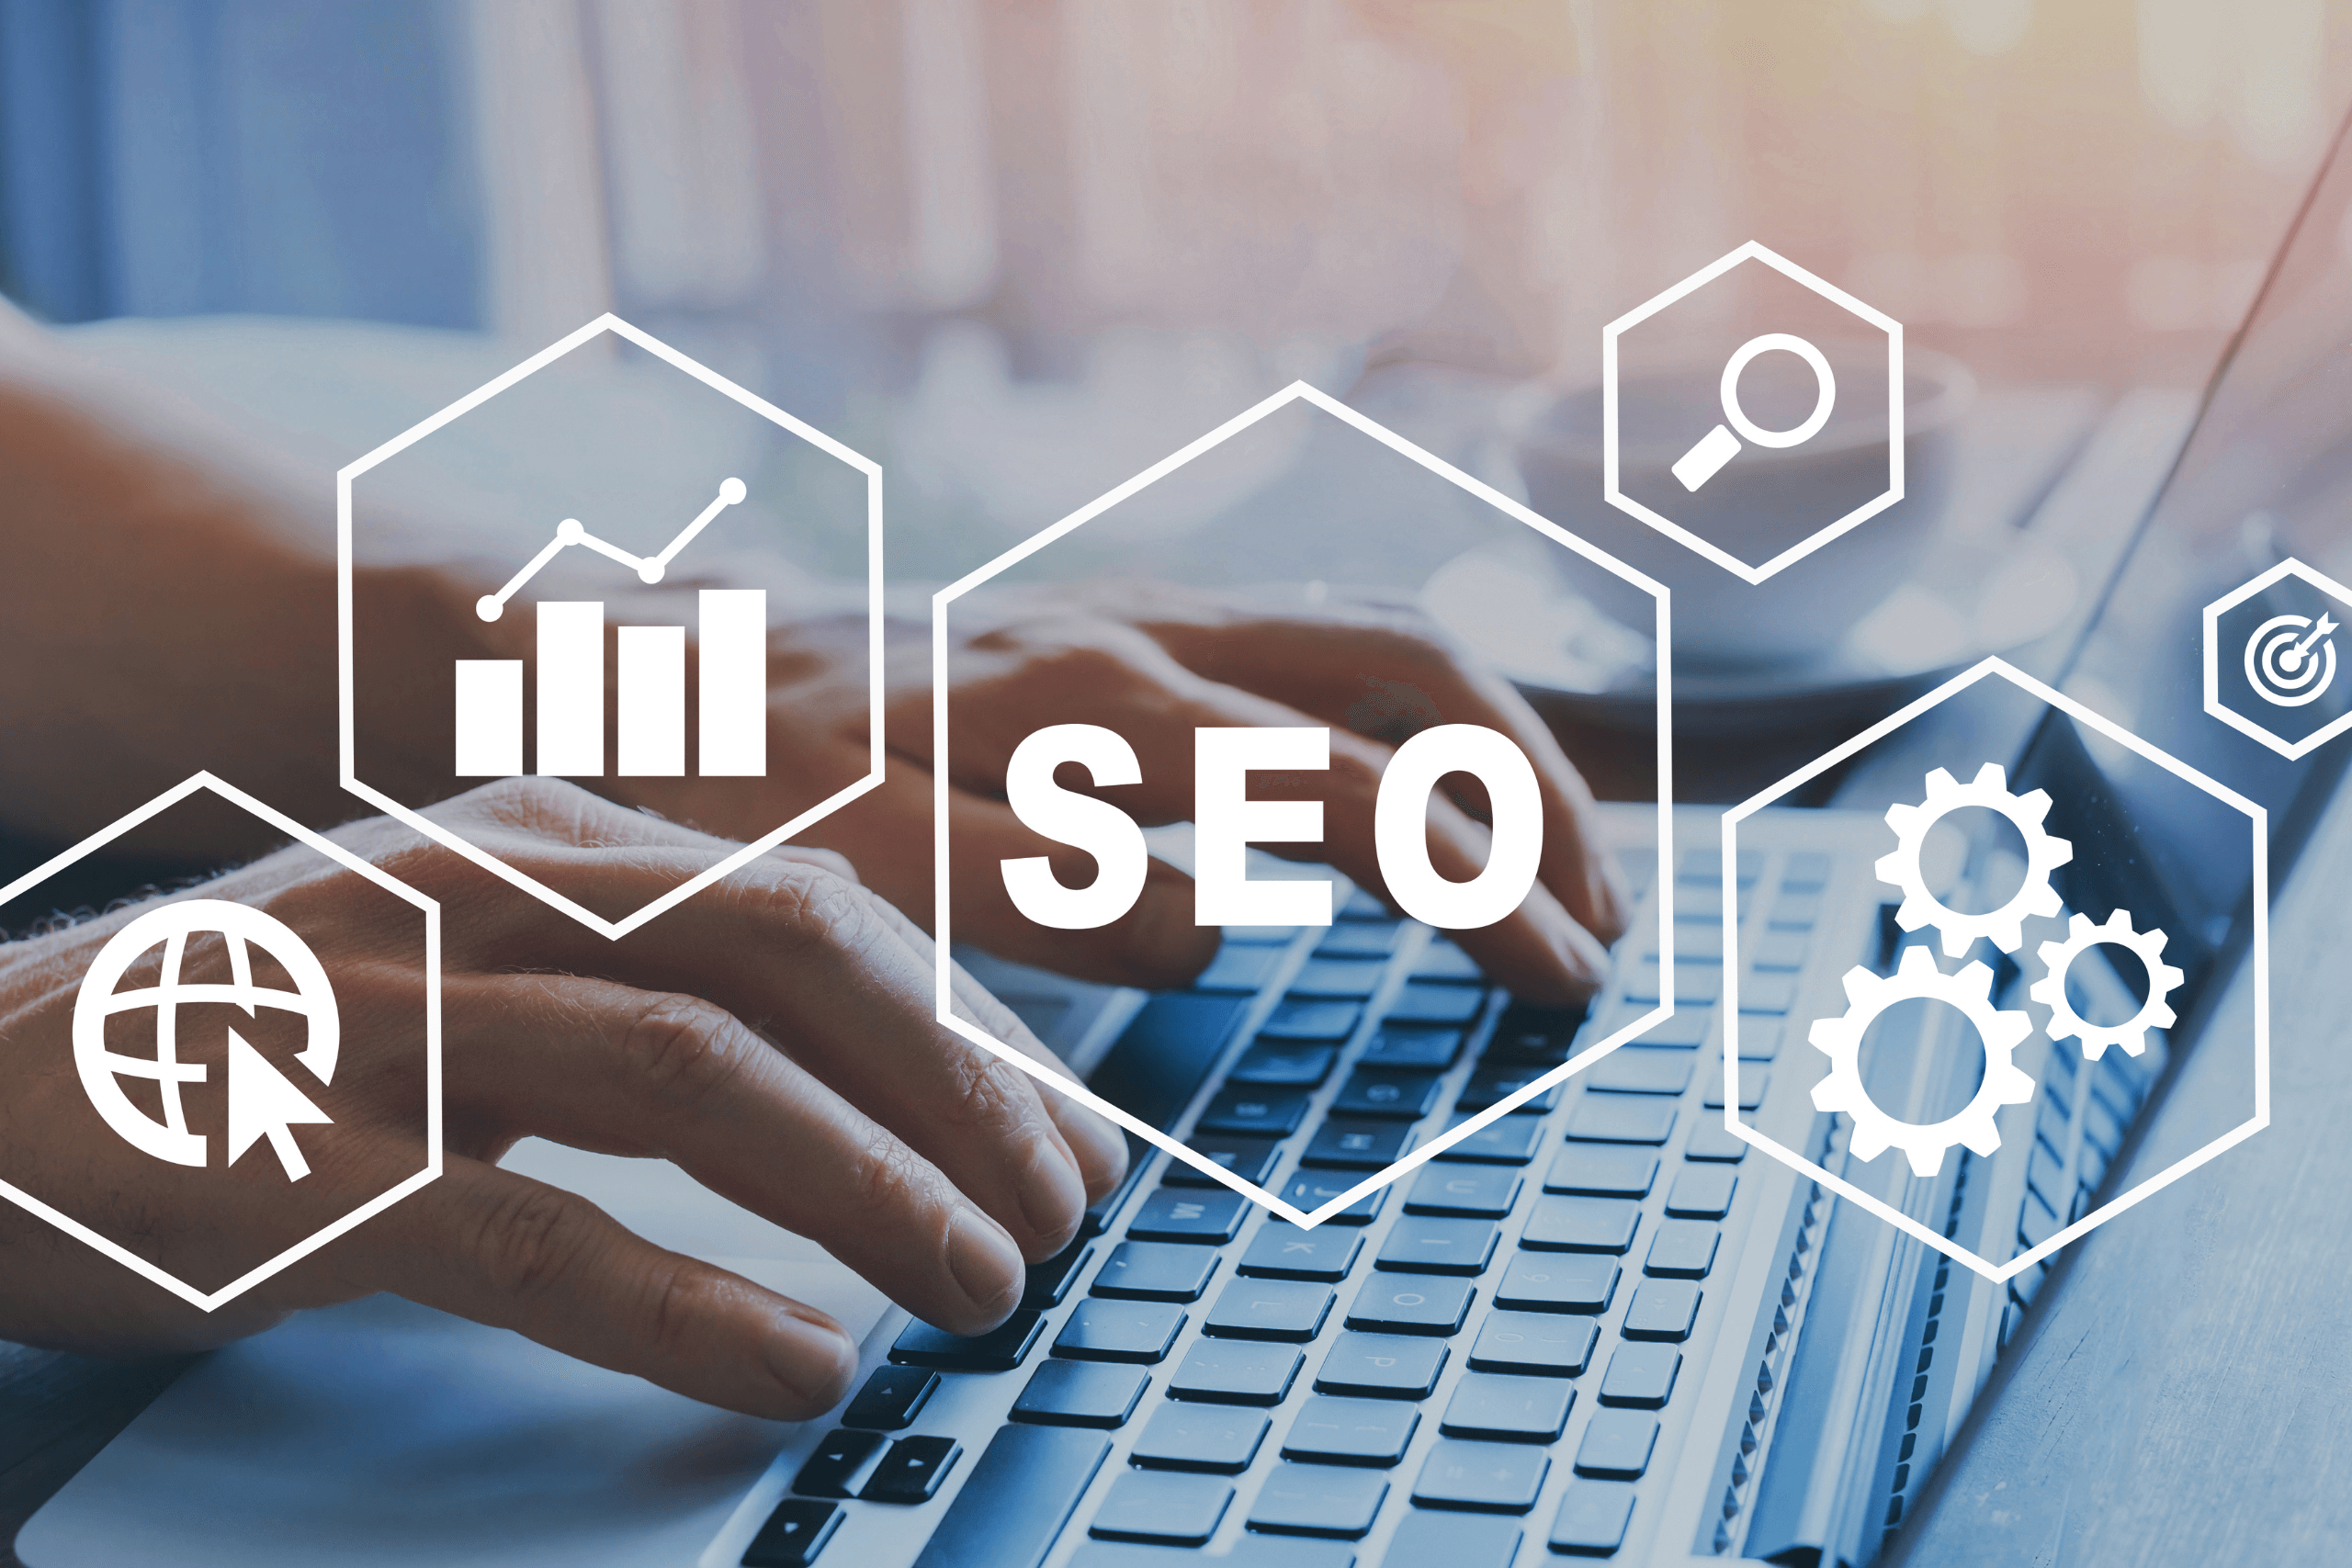 Using Essex SEO Services to Get the Most from Your Website